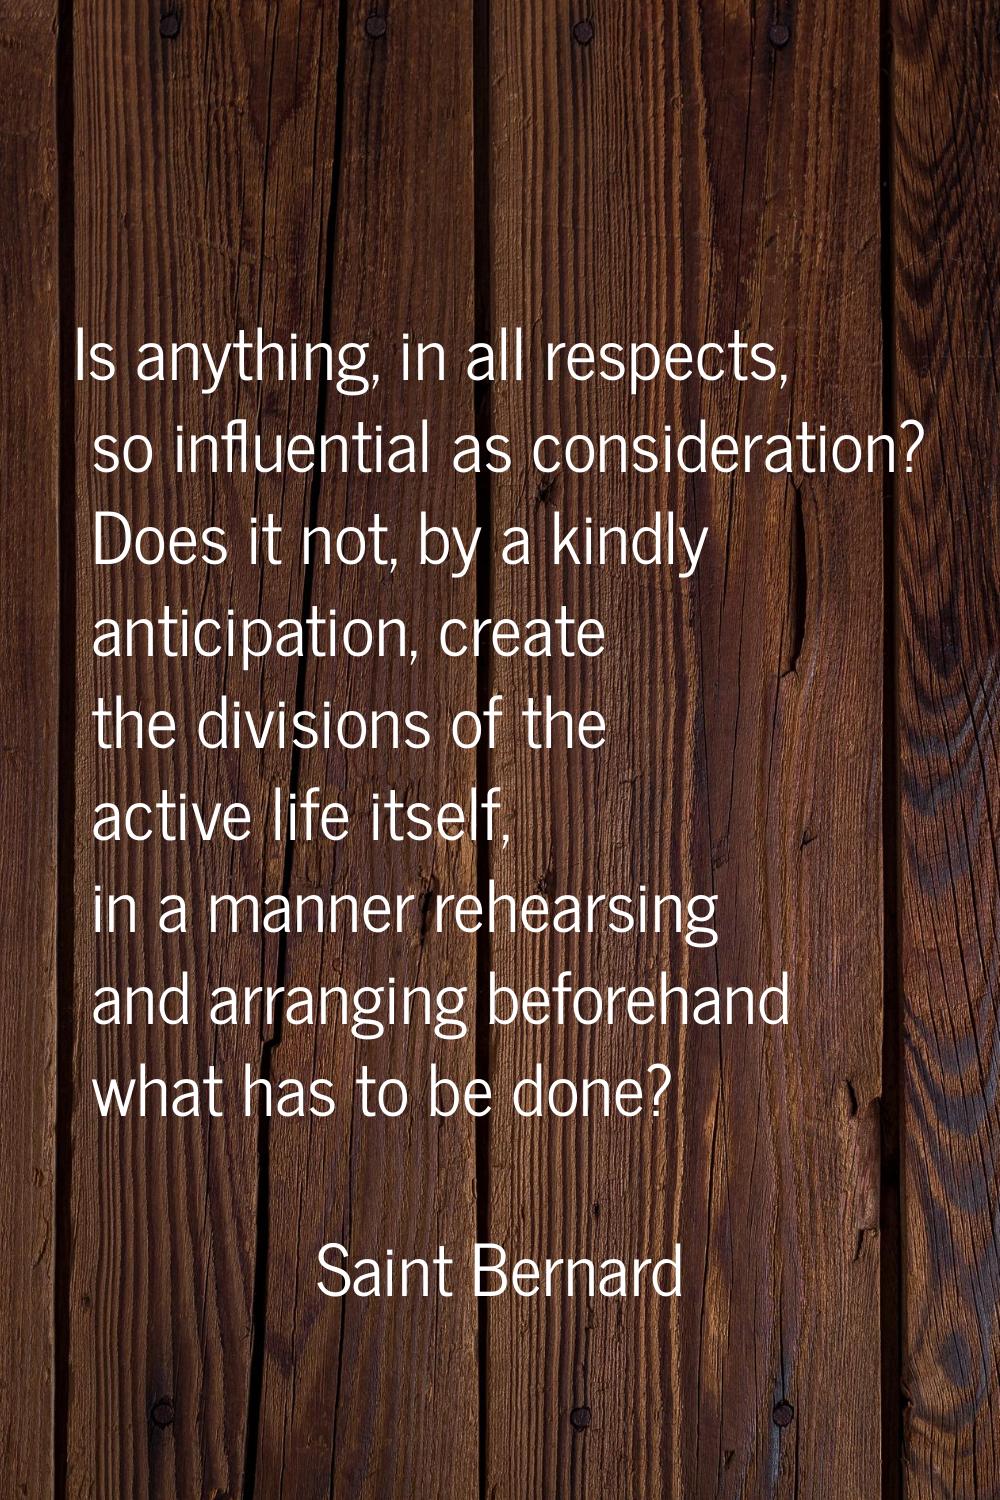 Is anything, in all respects, so influential as consideration? Does it not, by a kindly anticipatio